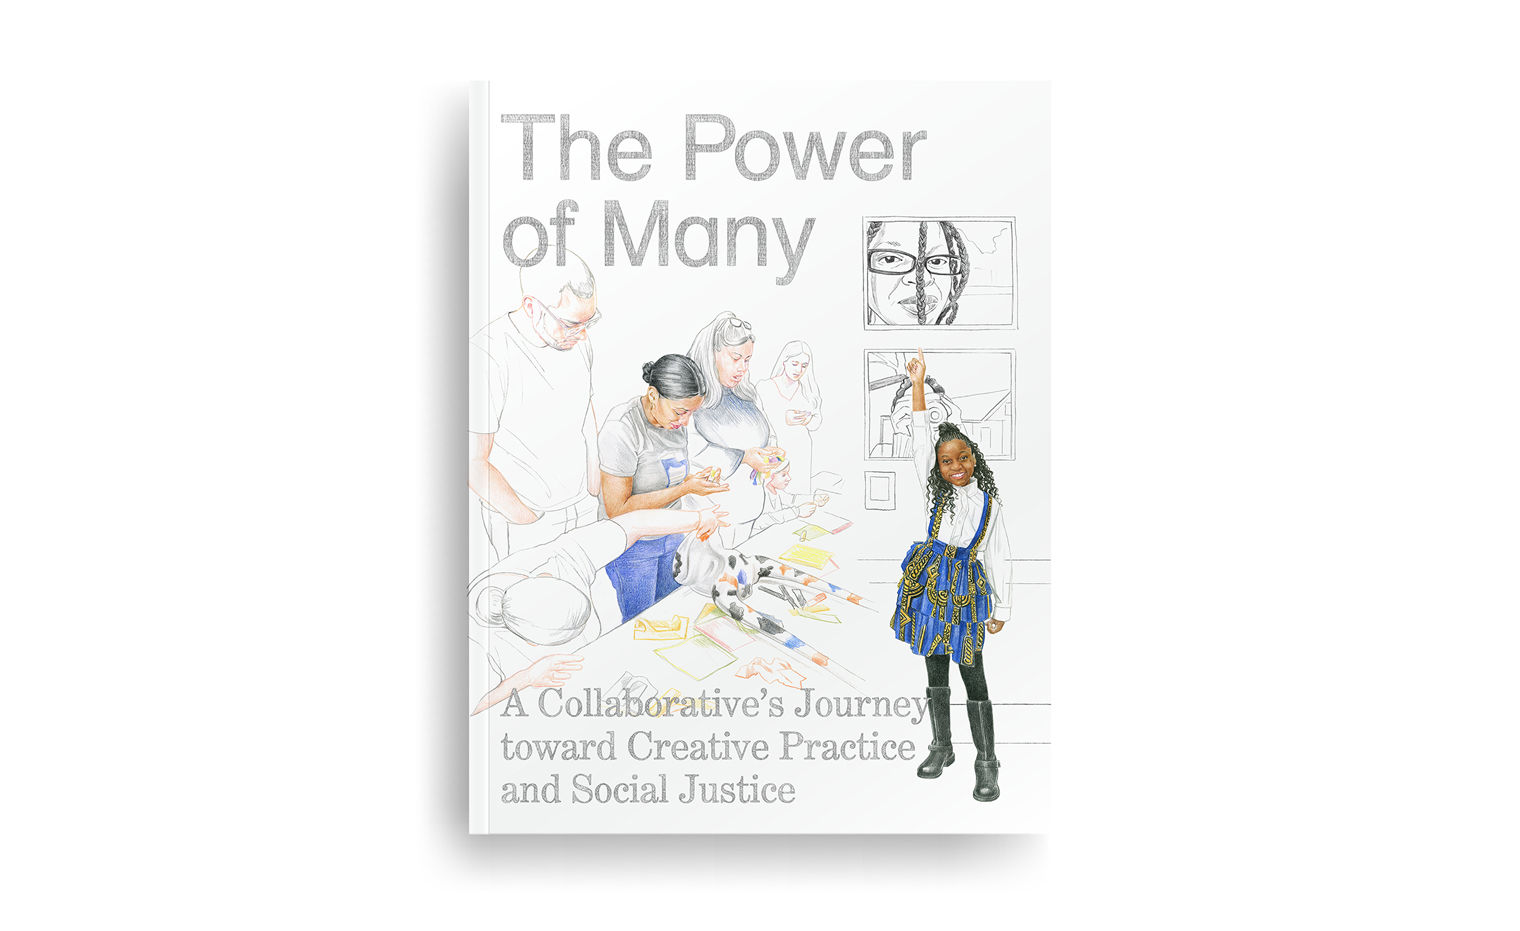 Book cover titled “The Power of Many: A Collaborative’s Journey toward Creative Practice and Social Justice”